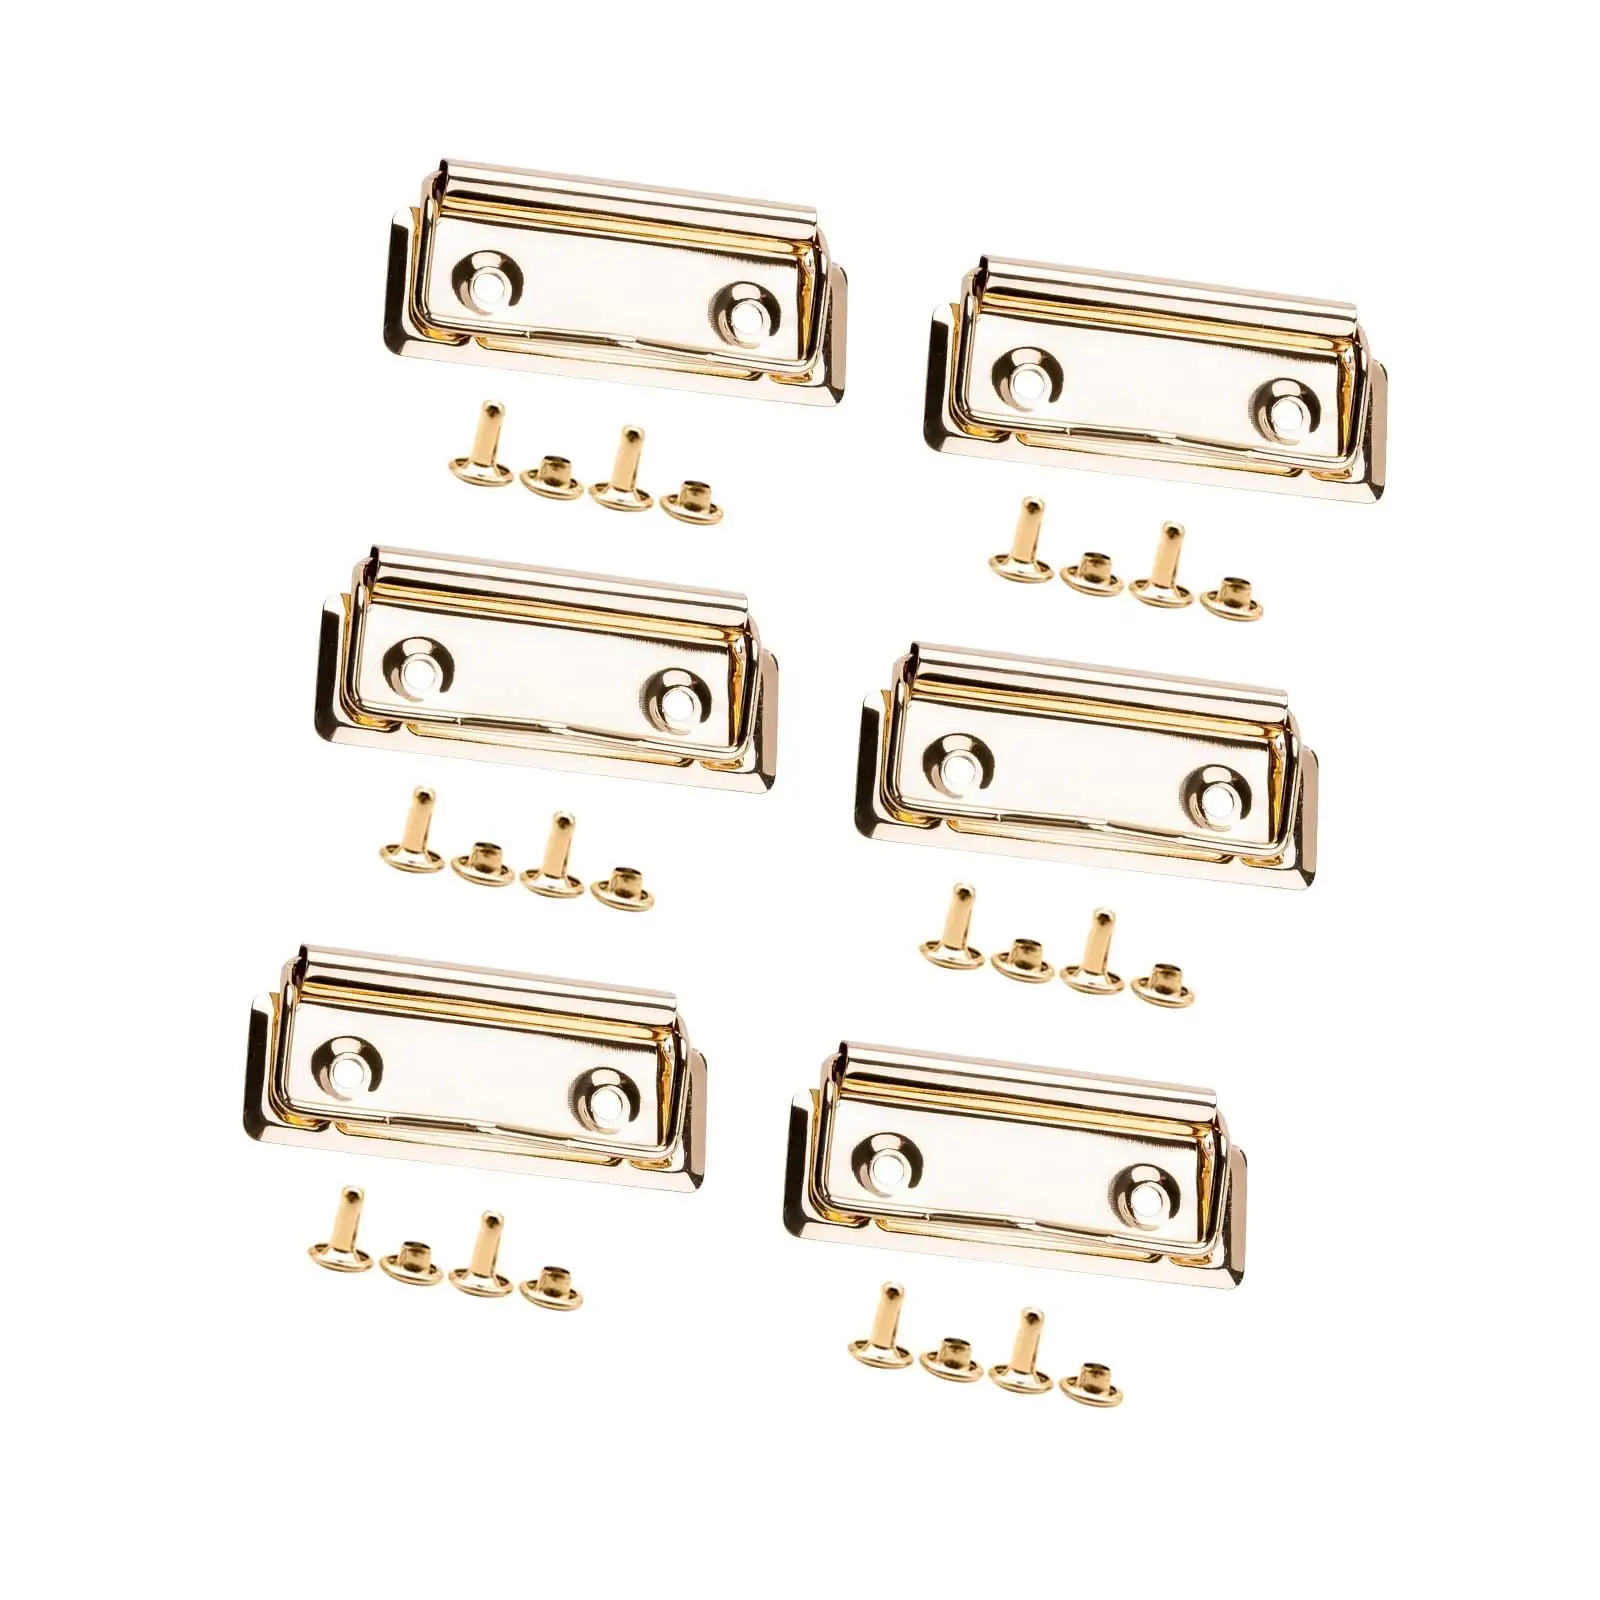 6Pcs Clips for Clipboard Metal Stationery Plate Holder Document File Board Clips for Office Stationery Supplies Business